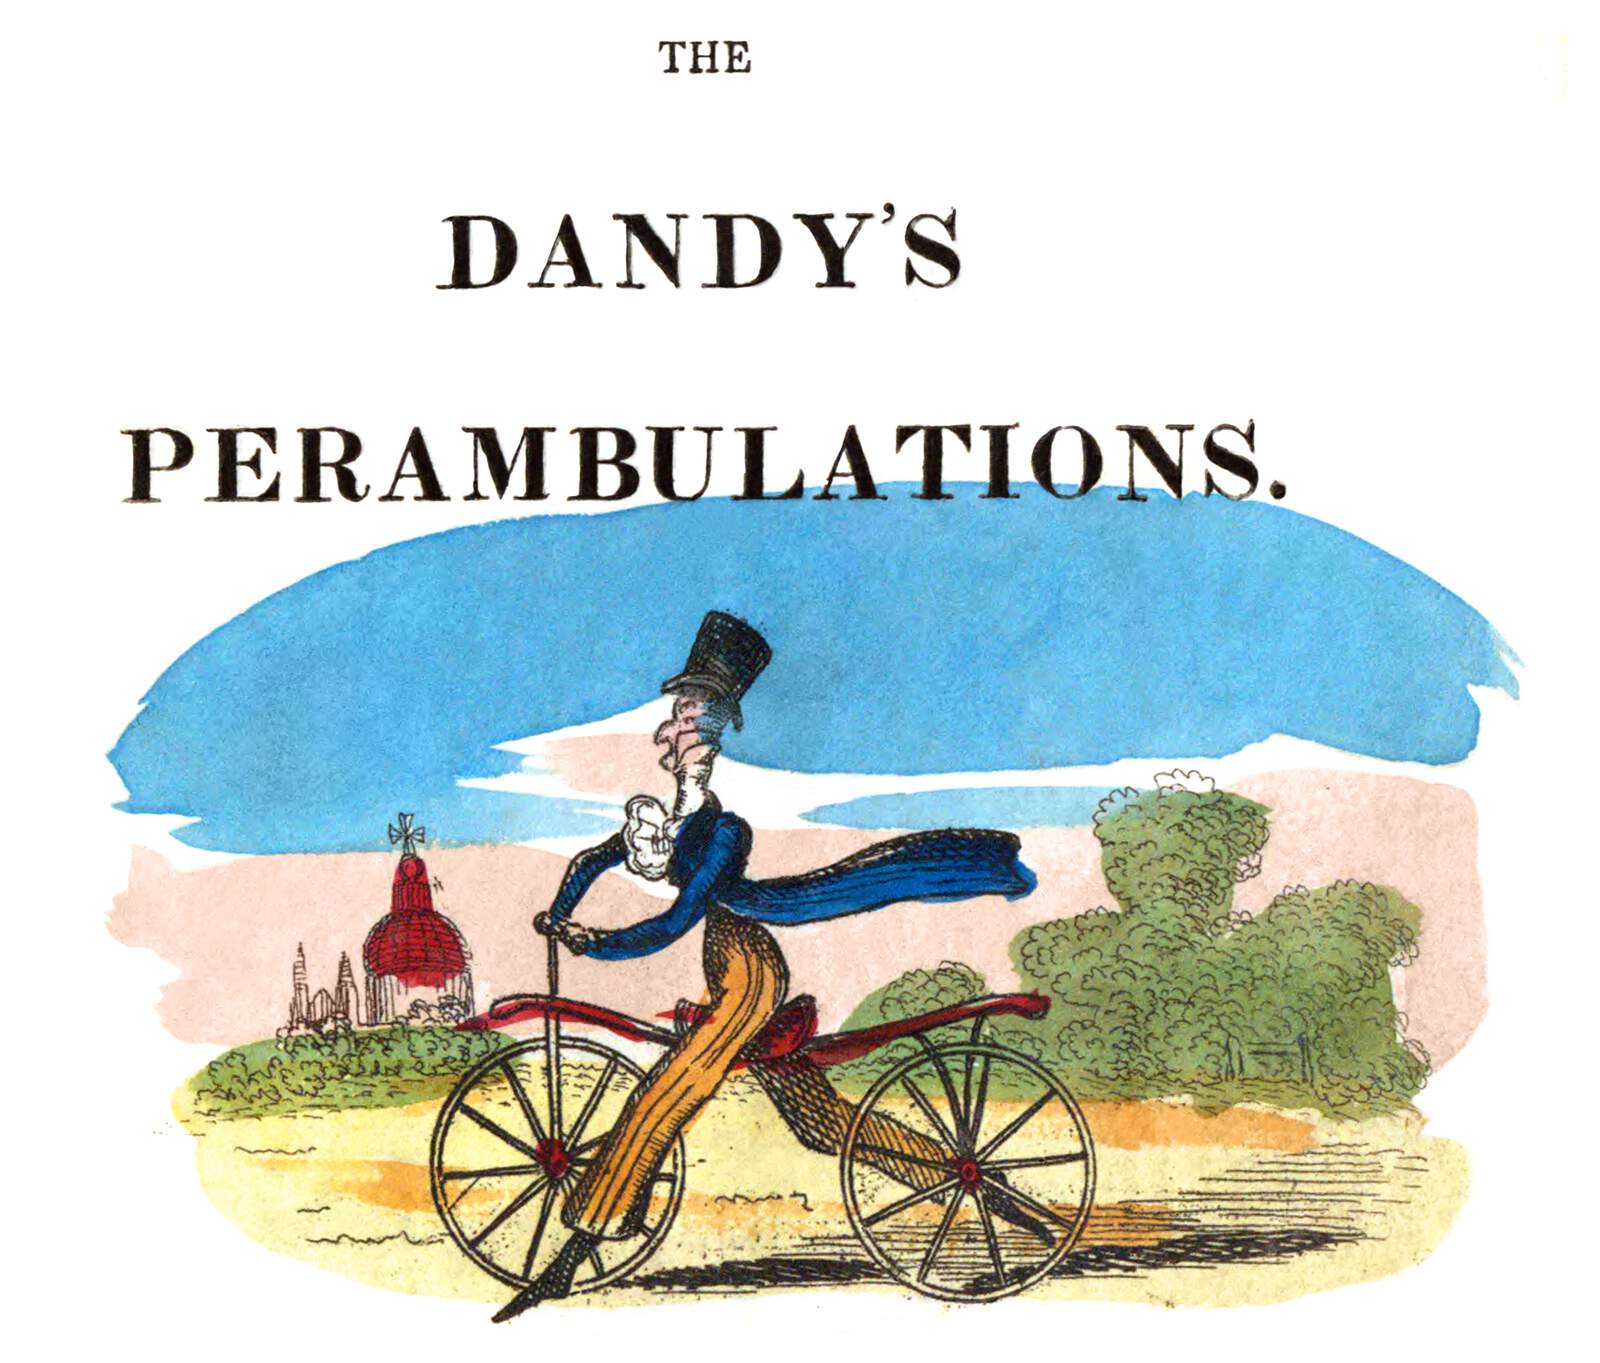 Dandy's – Old Book Illustrations